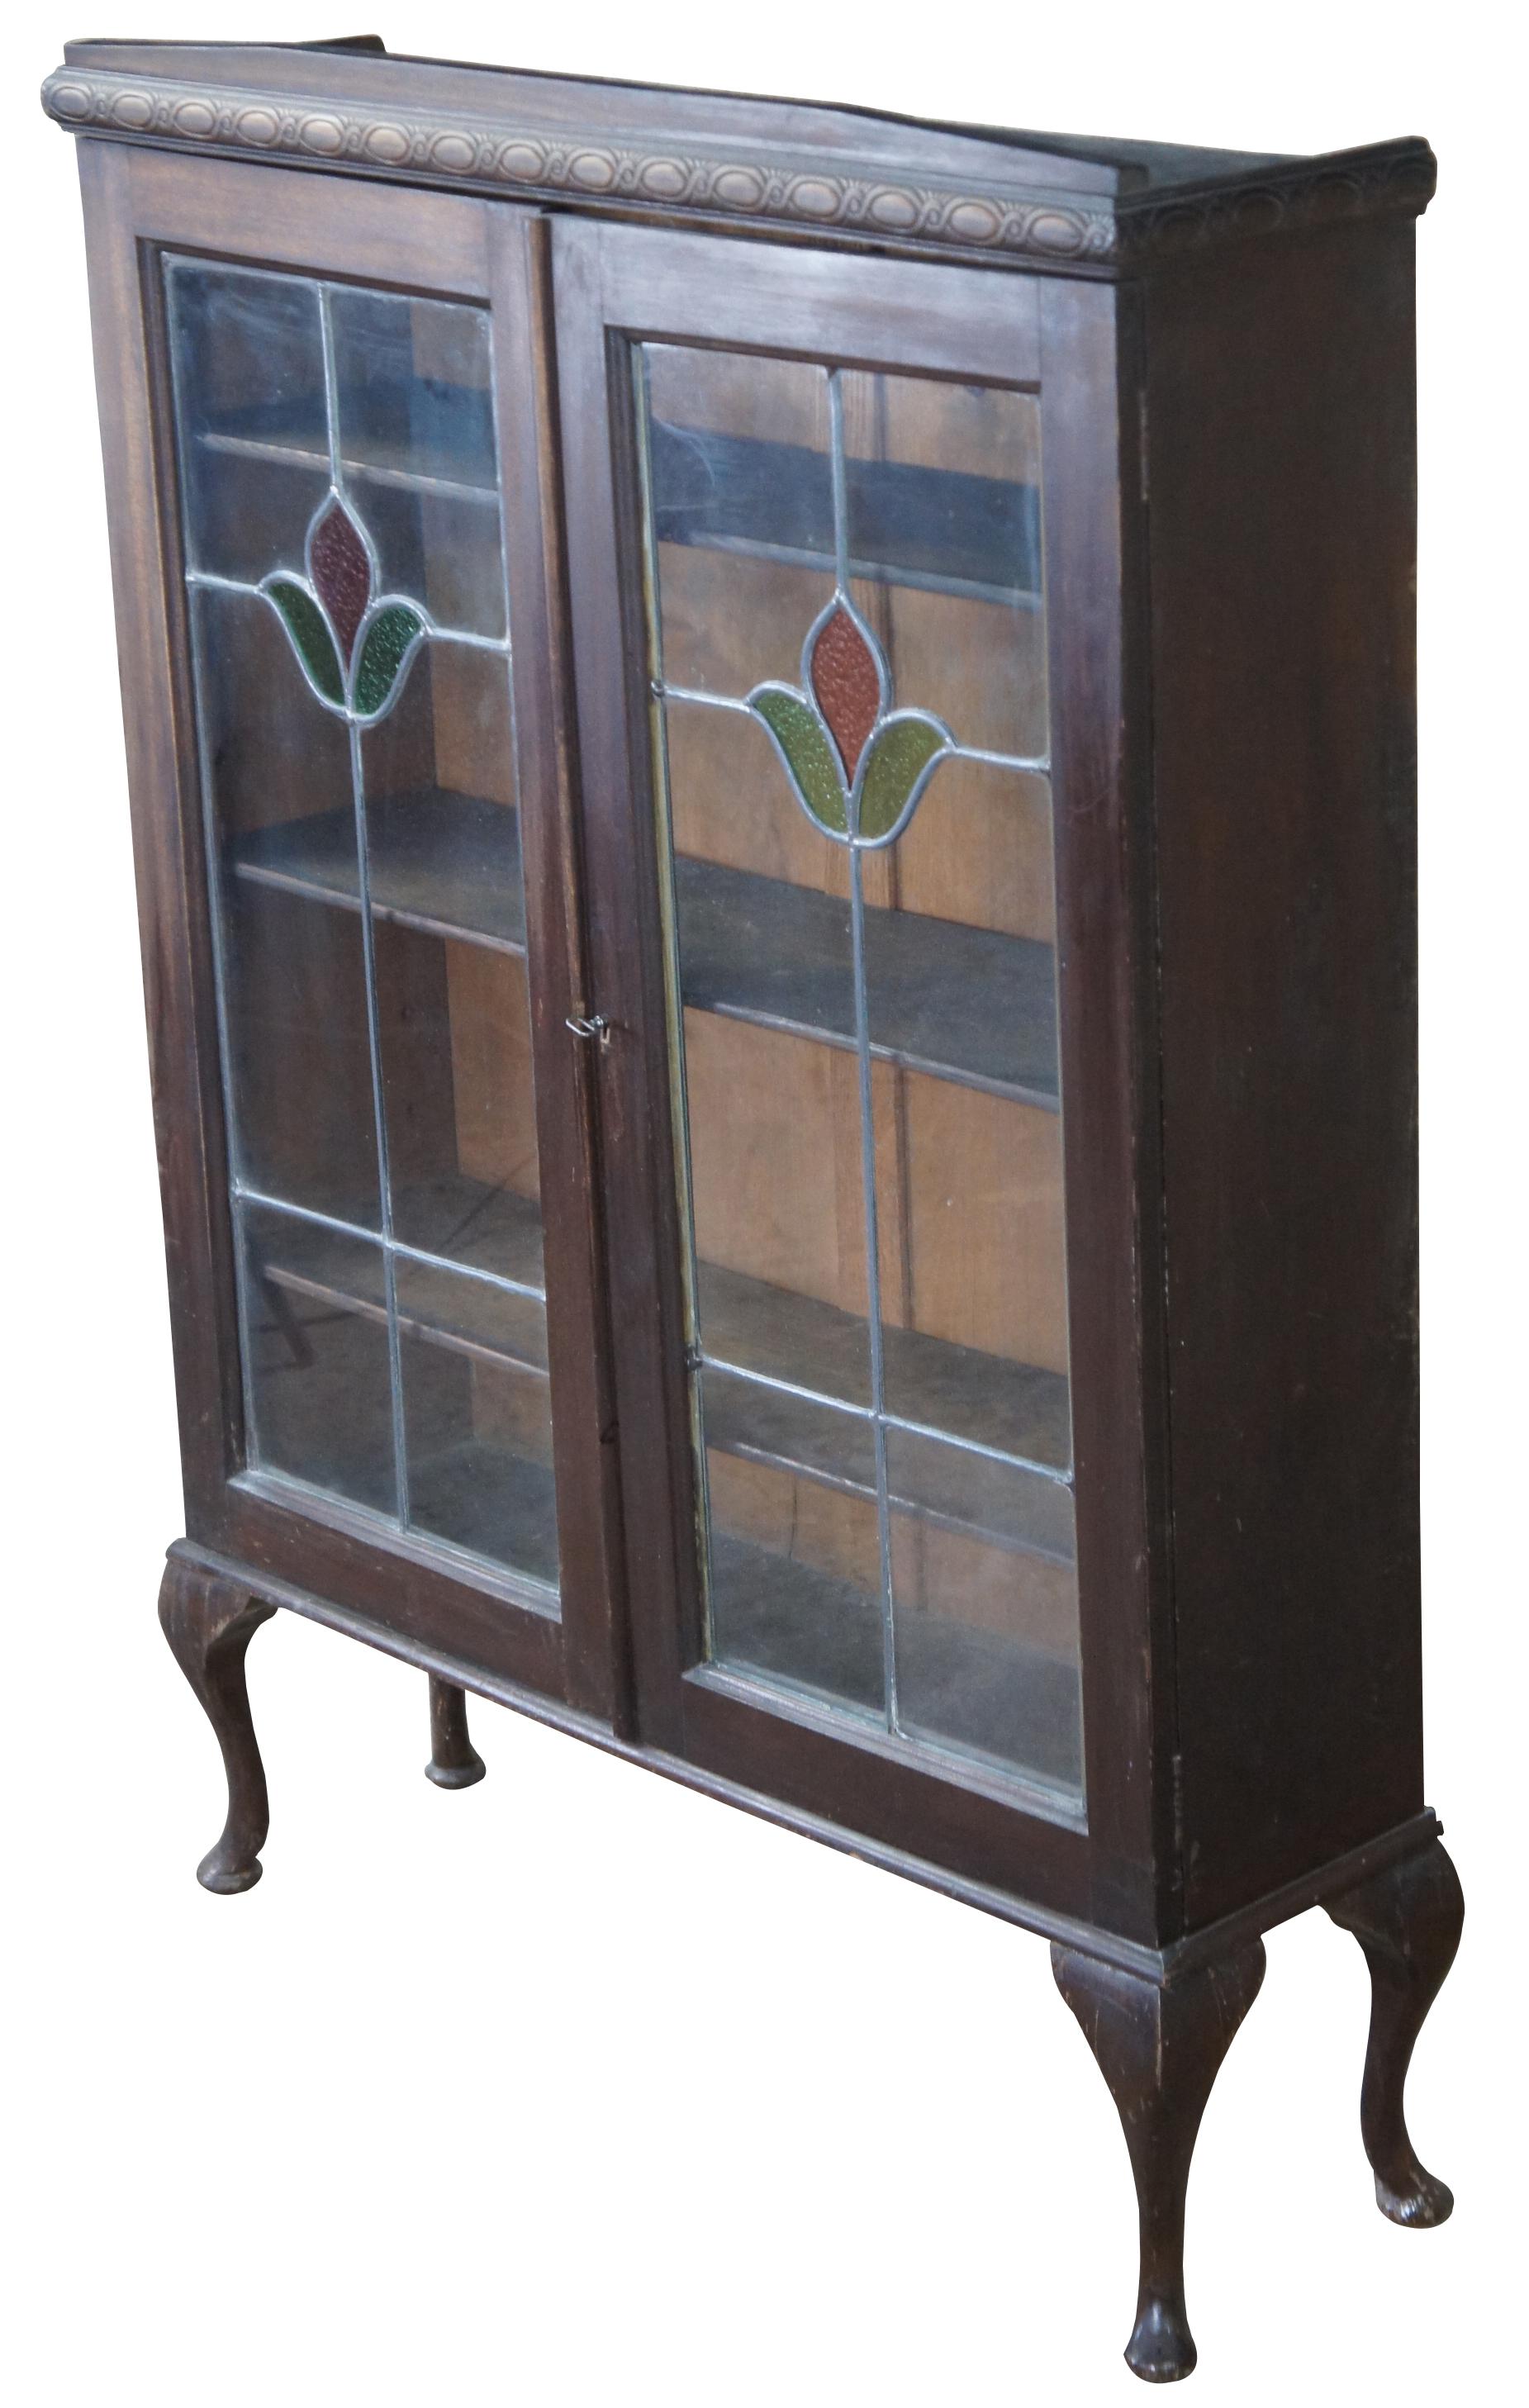 Antique English leaded glass curio cabinet or bookcase featuring Queen Ann styling with a rose or flower slag glass insert and cabriole legs. Measures: 53